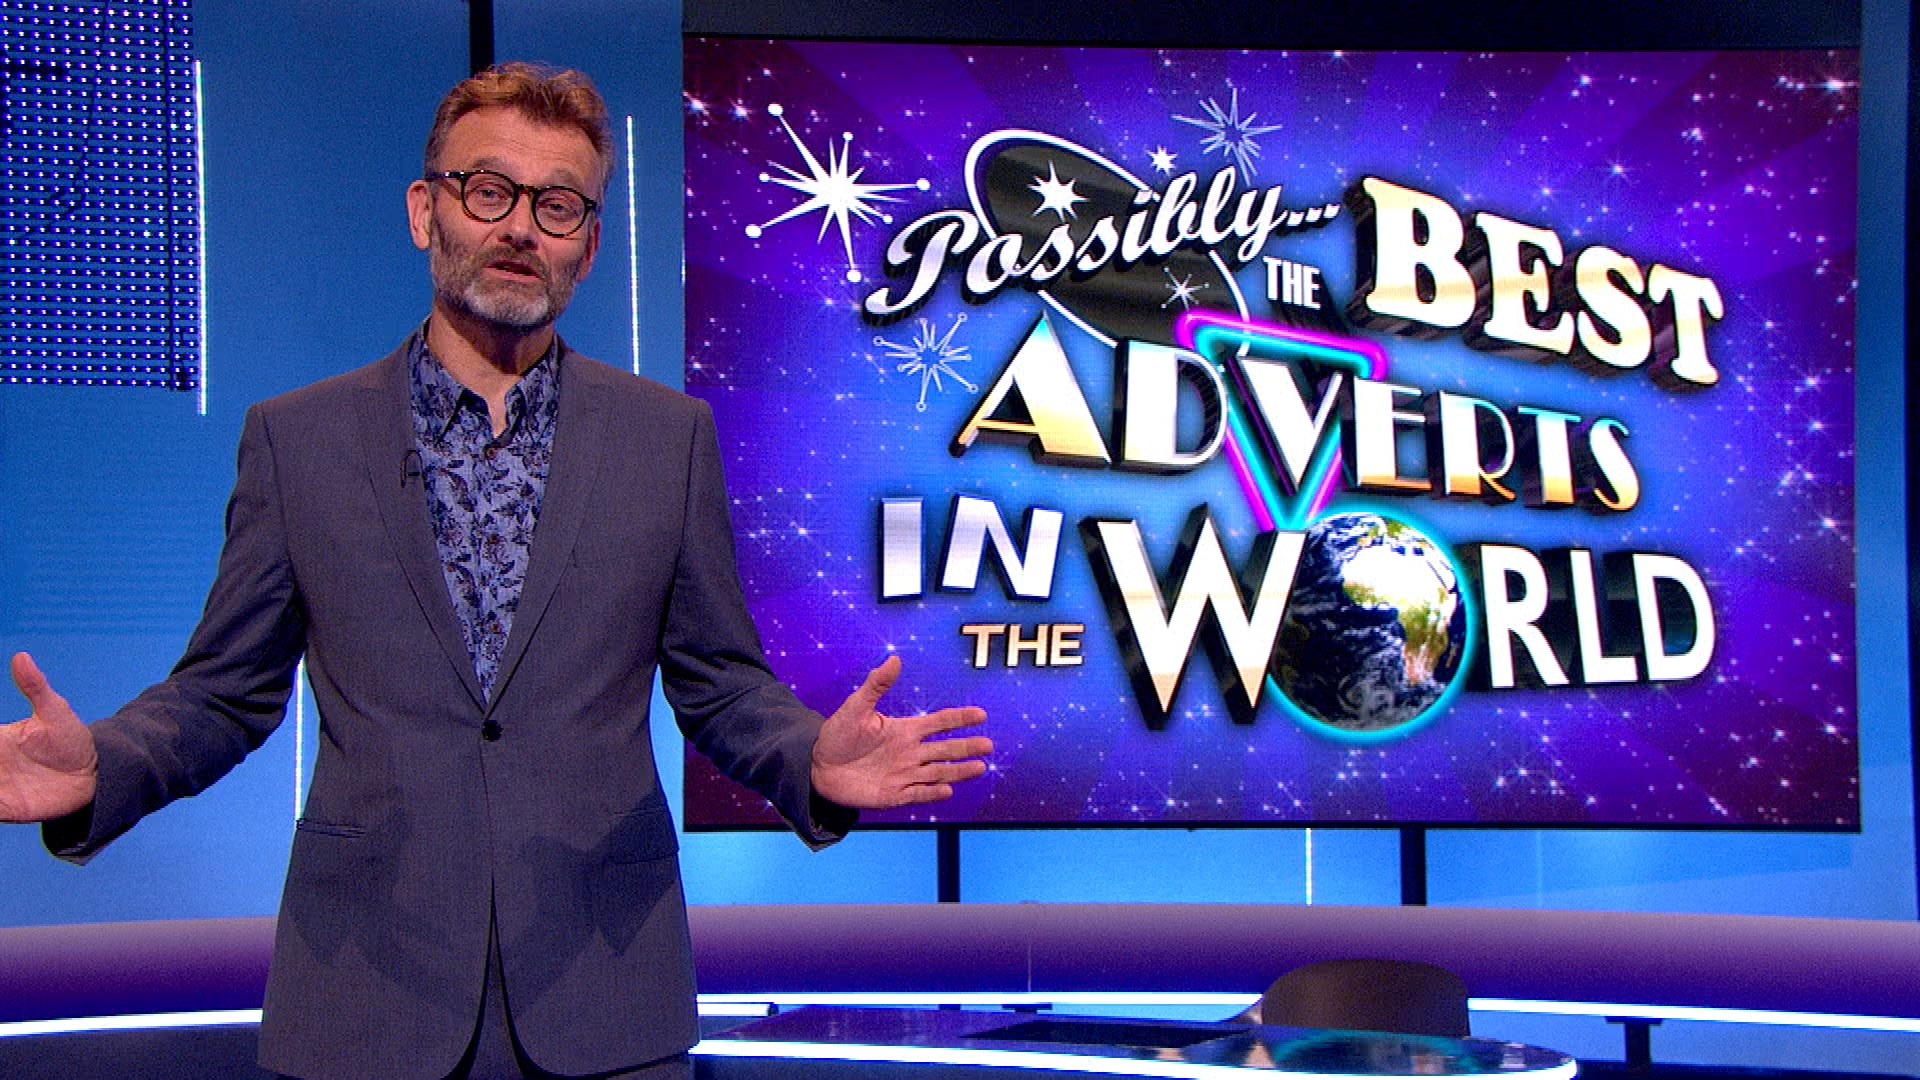 Hugh Dennis hosted Possibly... The Best Adverts In The World